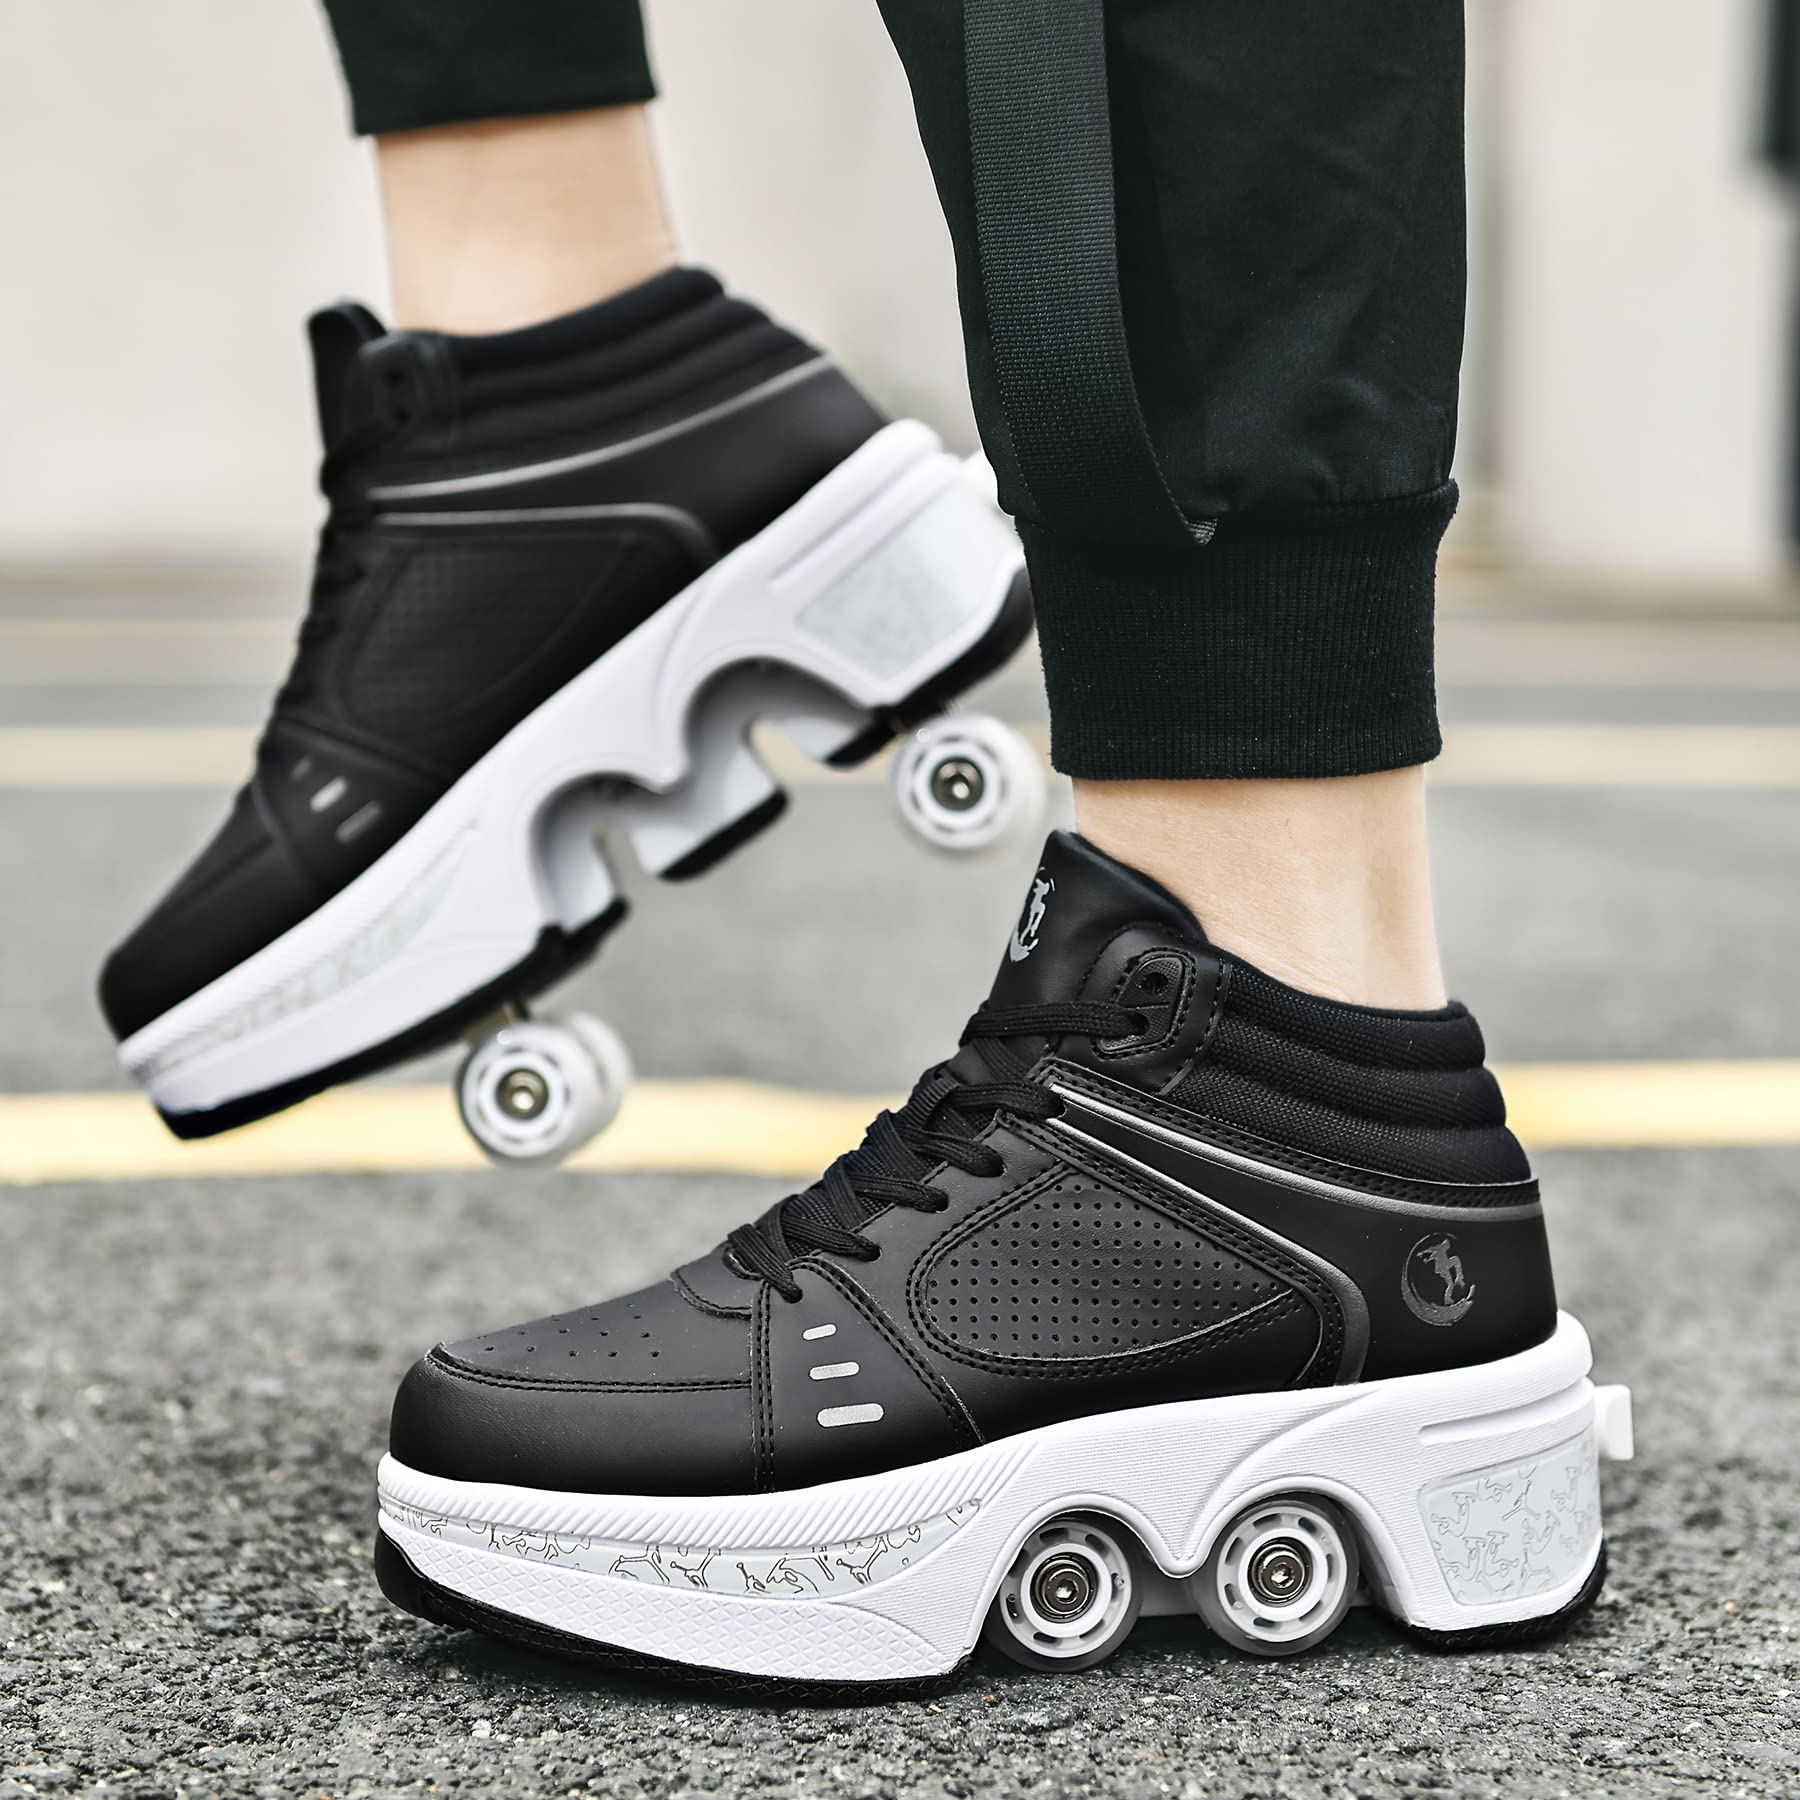 Roller Skate Shoes for Women Four Rounds Children's Roller Skates Shoes That Turn into Rollerskates Sneakers Outdoor Light Shoes with Wheels for Girls/Boys (Black NO Light, US 7.5)